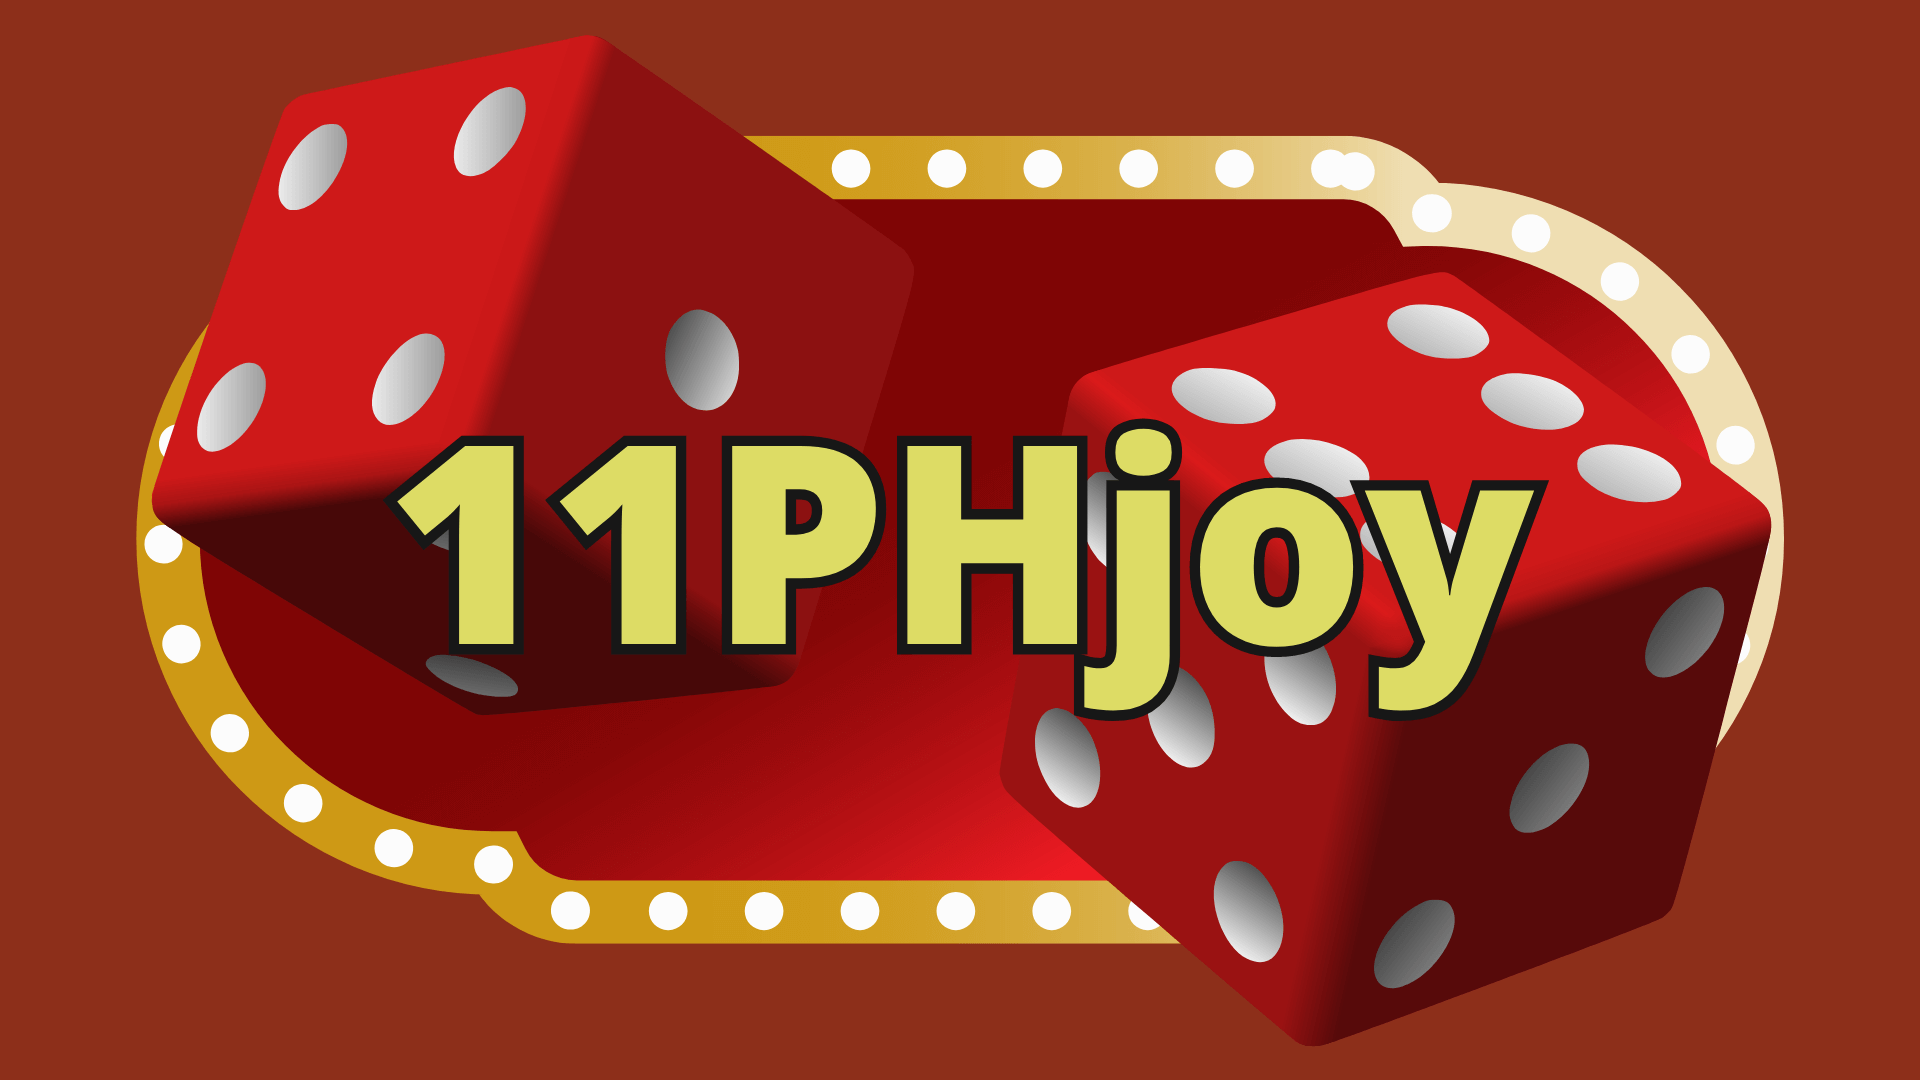 You are currently viewing 11PHjoy Live